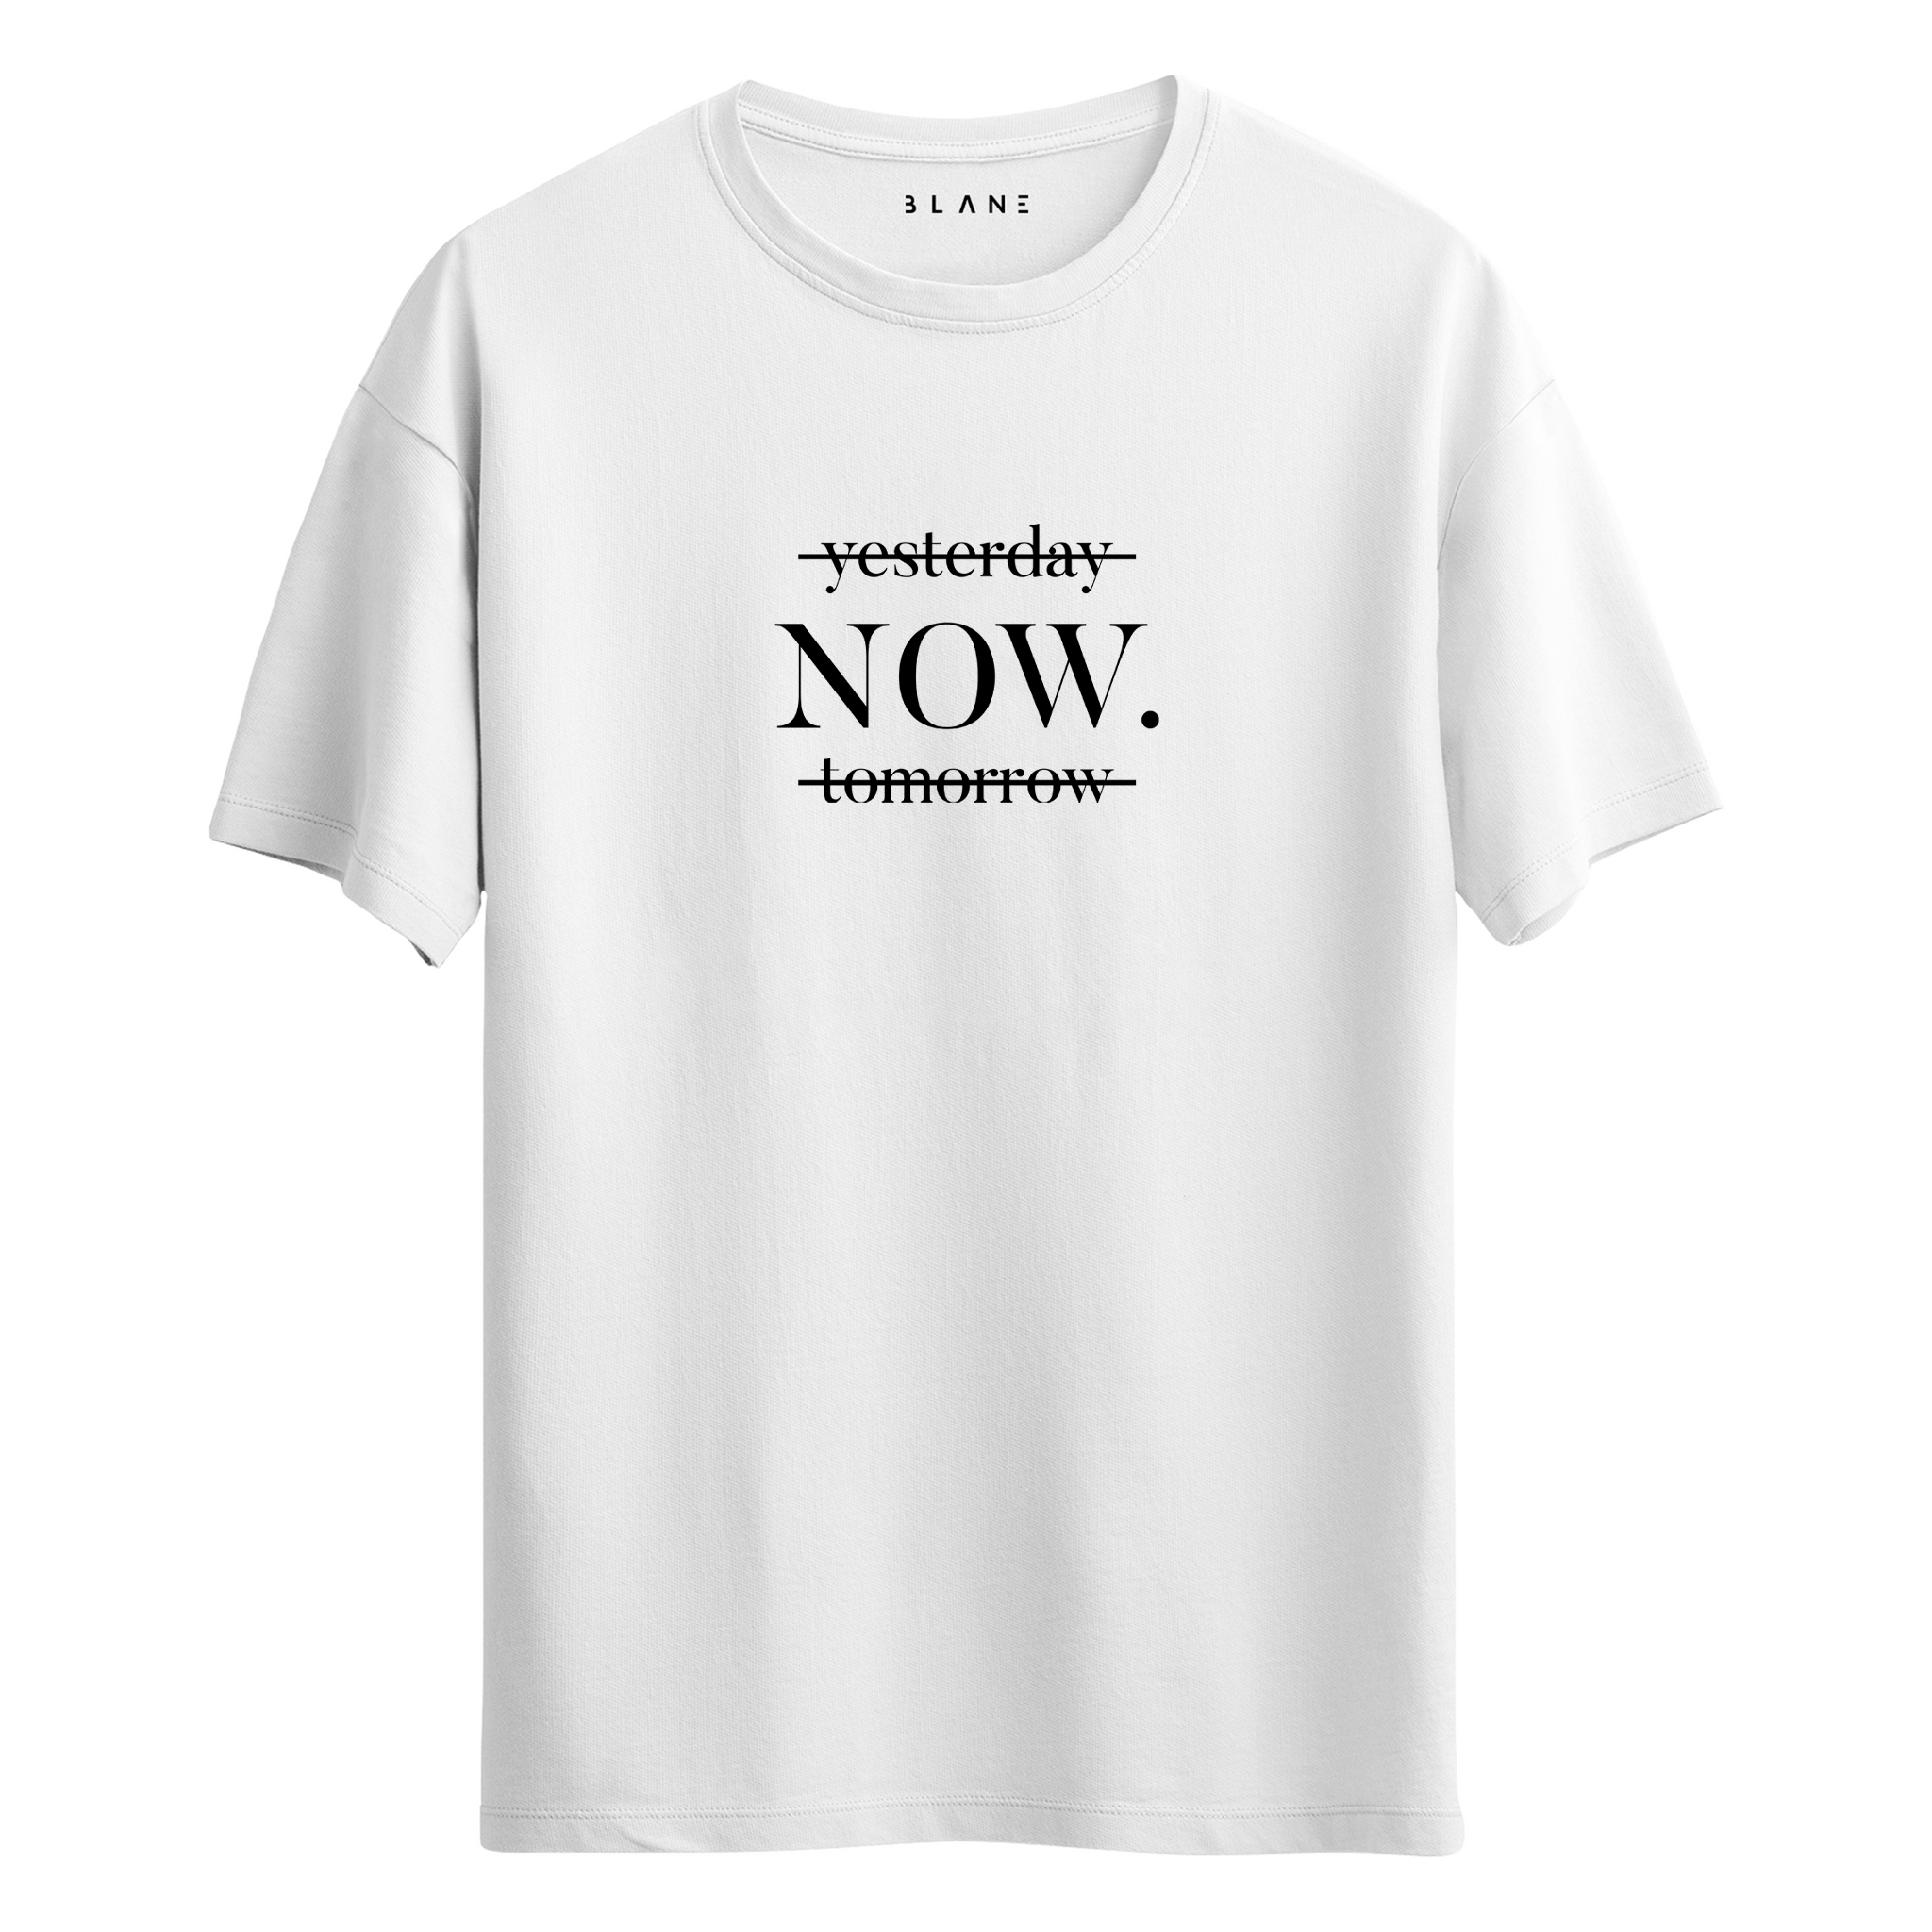 Yesterday Now Tomorrow - T-Shirt